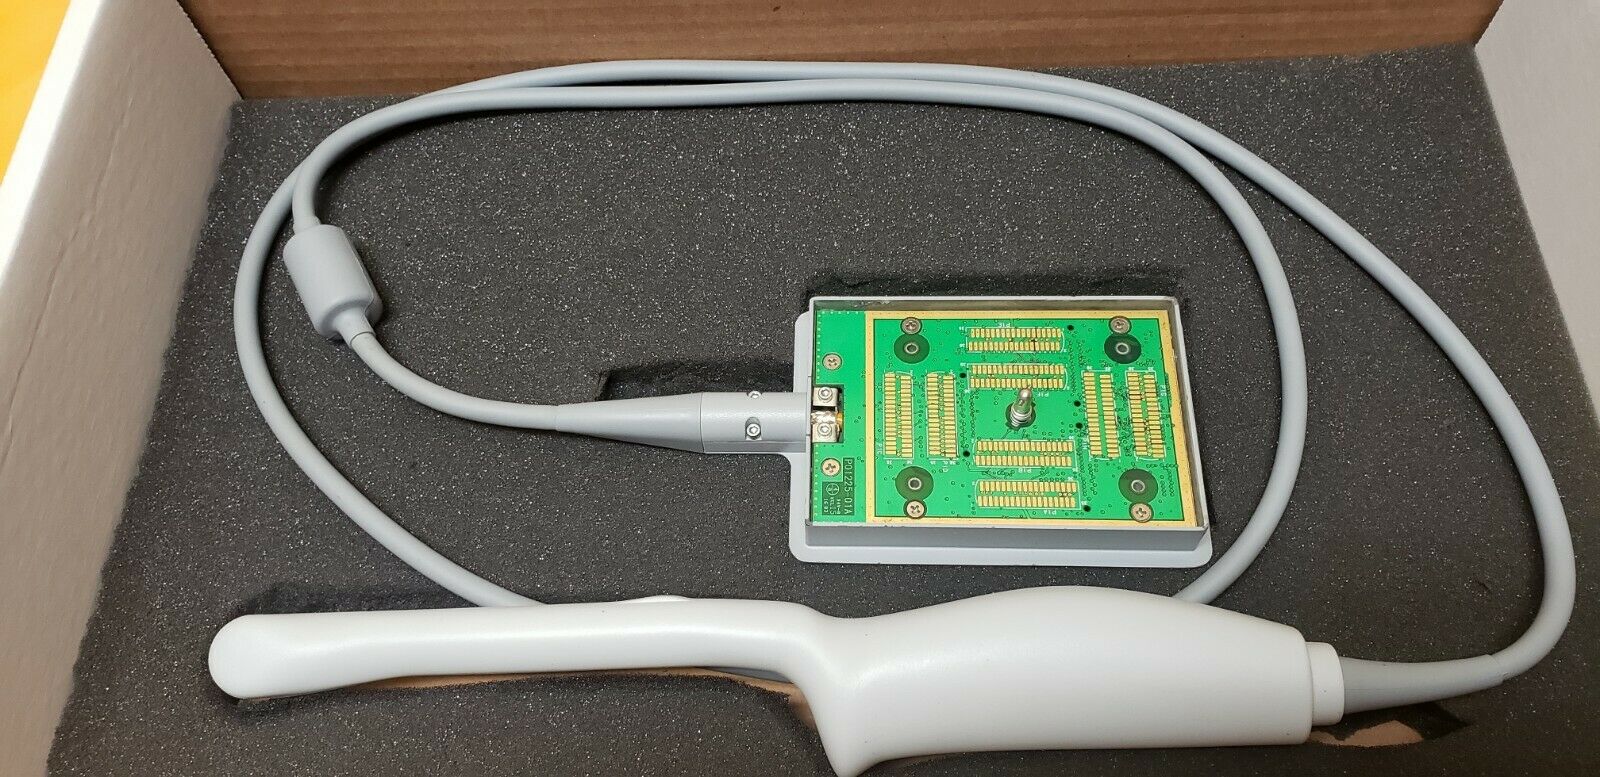 SonoSite ICT/7-4 MHZ Vaginal Ultrasound Transducer Probe  Made in USA DIAGNOSTIC ULTRASOUND MACHINES FOR SALE